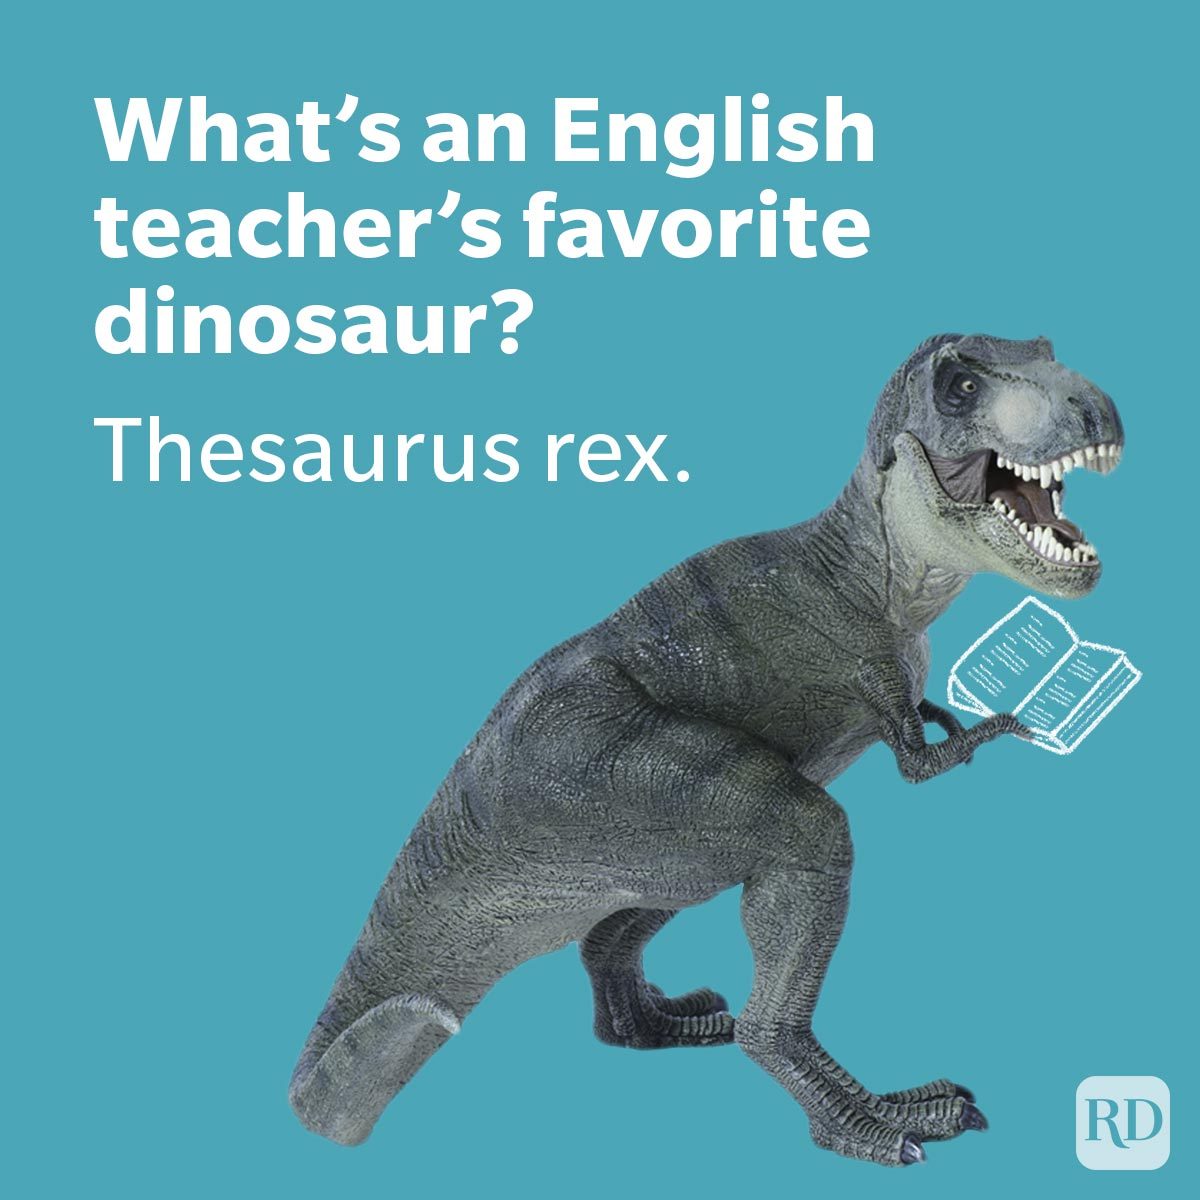 School Jokes That Won't Land You In Detention tyrannosaurus rex holding a thesaurus book dictionary on turquoise background